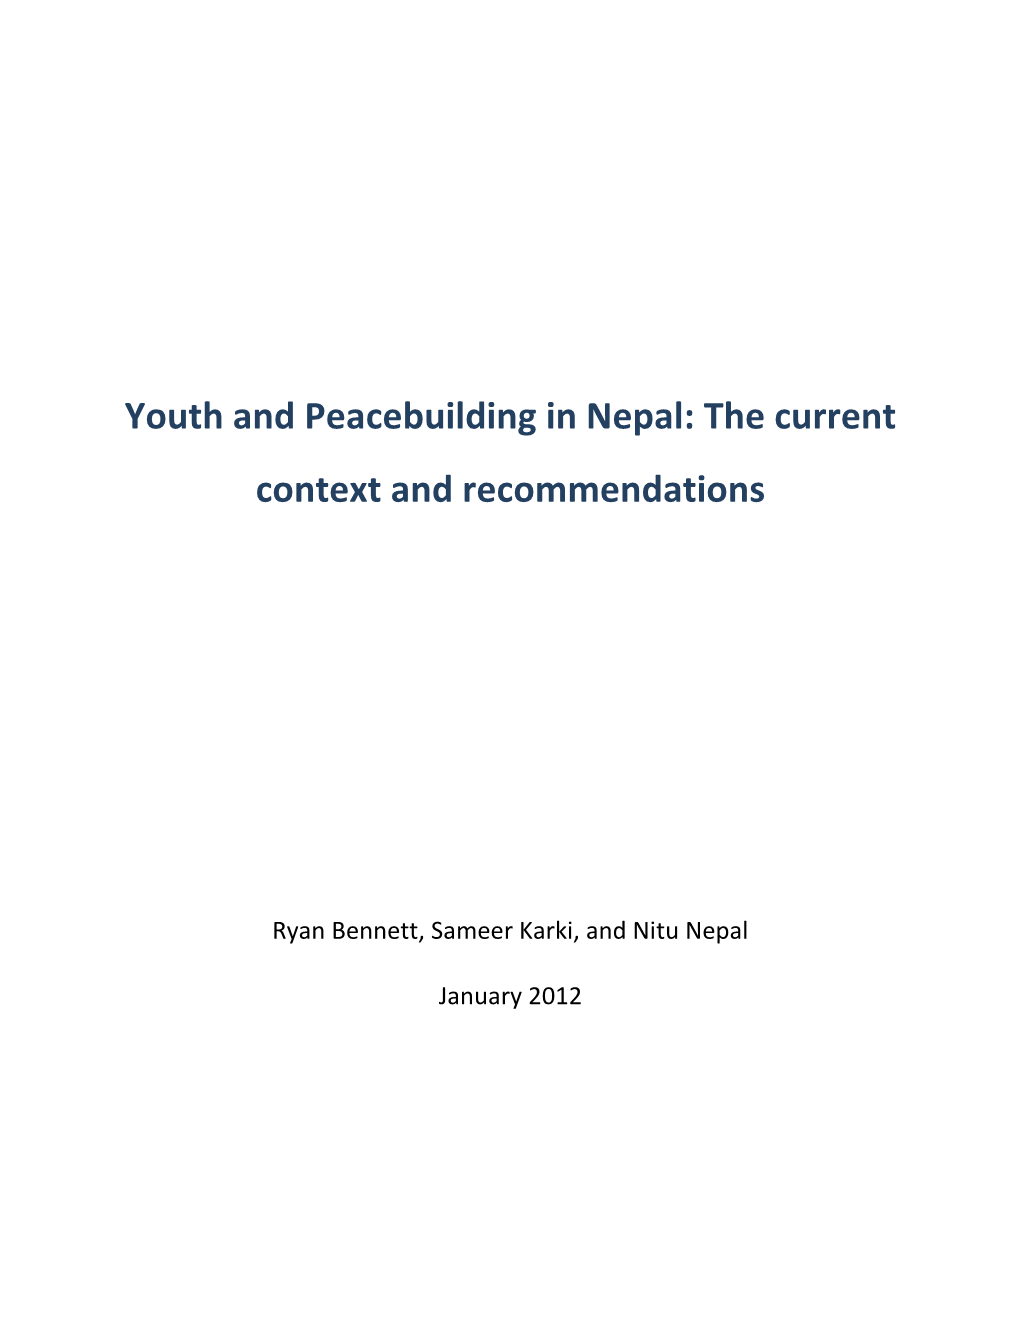 Youth and Peacebuilding in Nepal: the Current Context and Recommendations